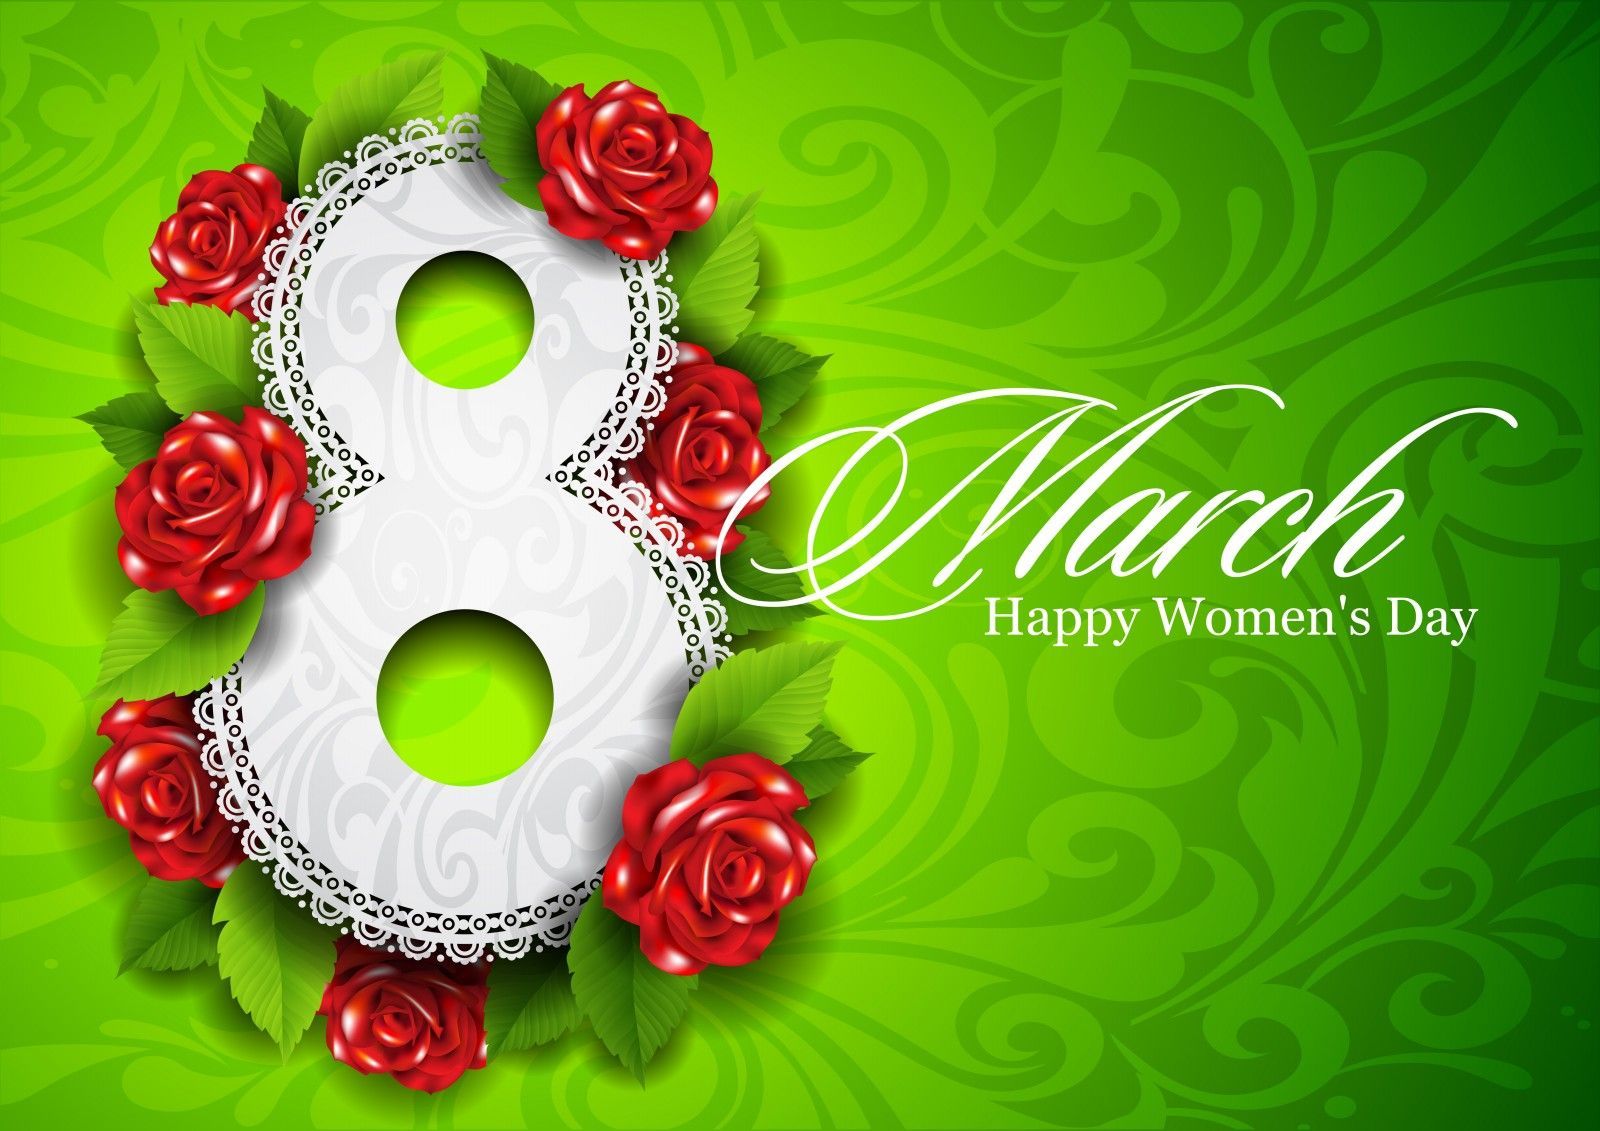 March Happy Womens Day wallpaper .com